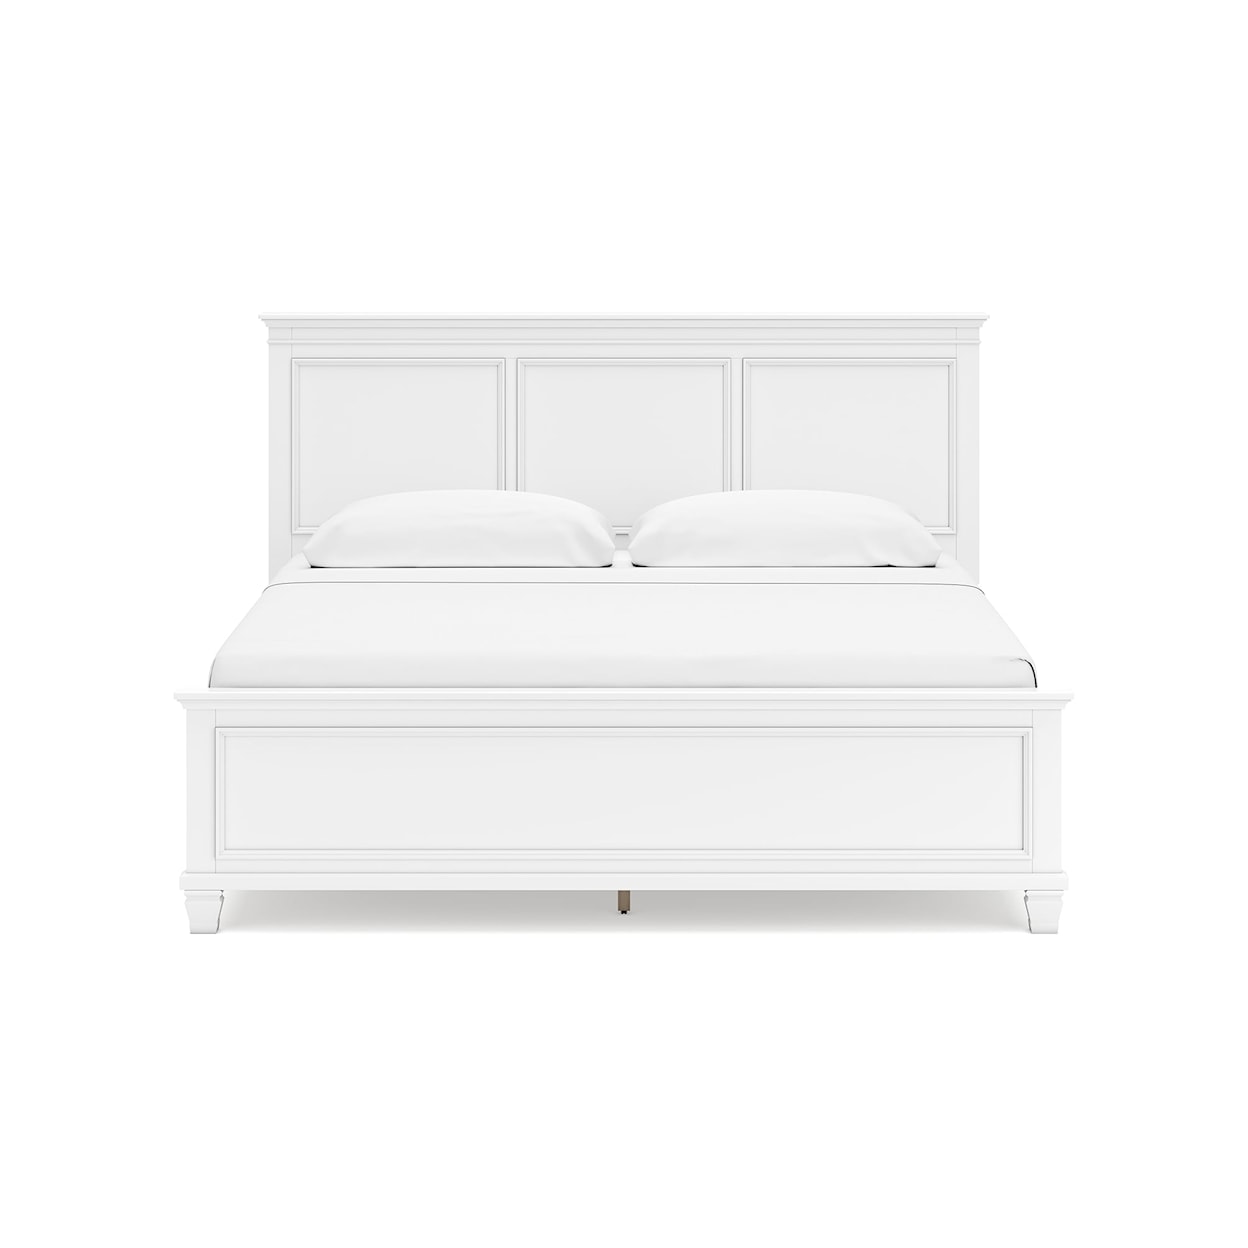 Signature Design by Ashley Fortman King Panel Bed